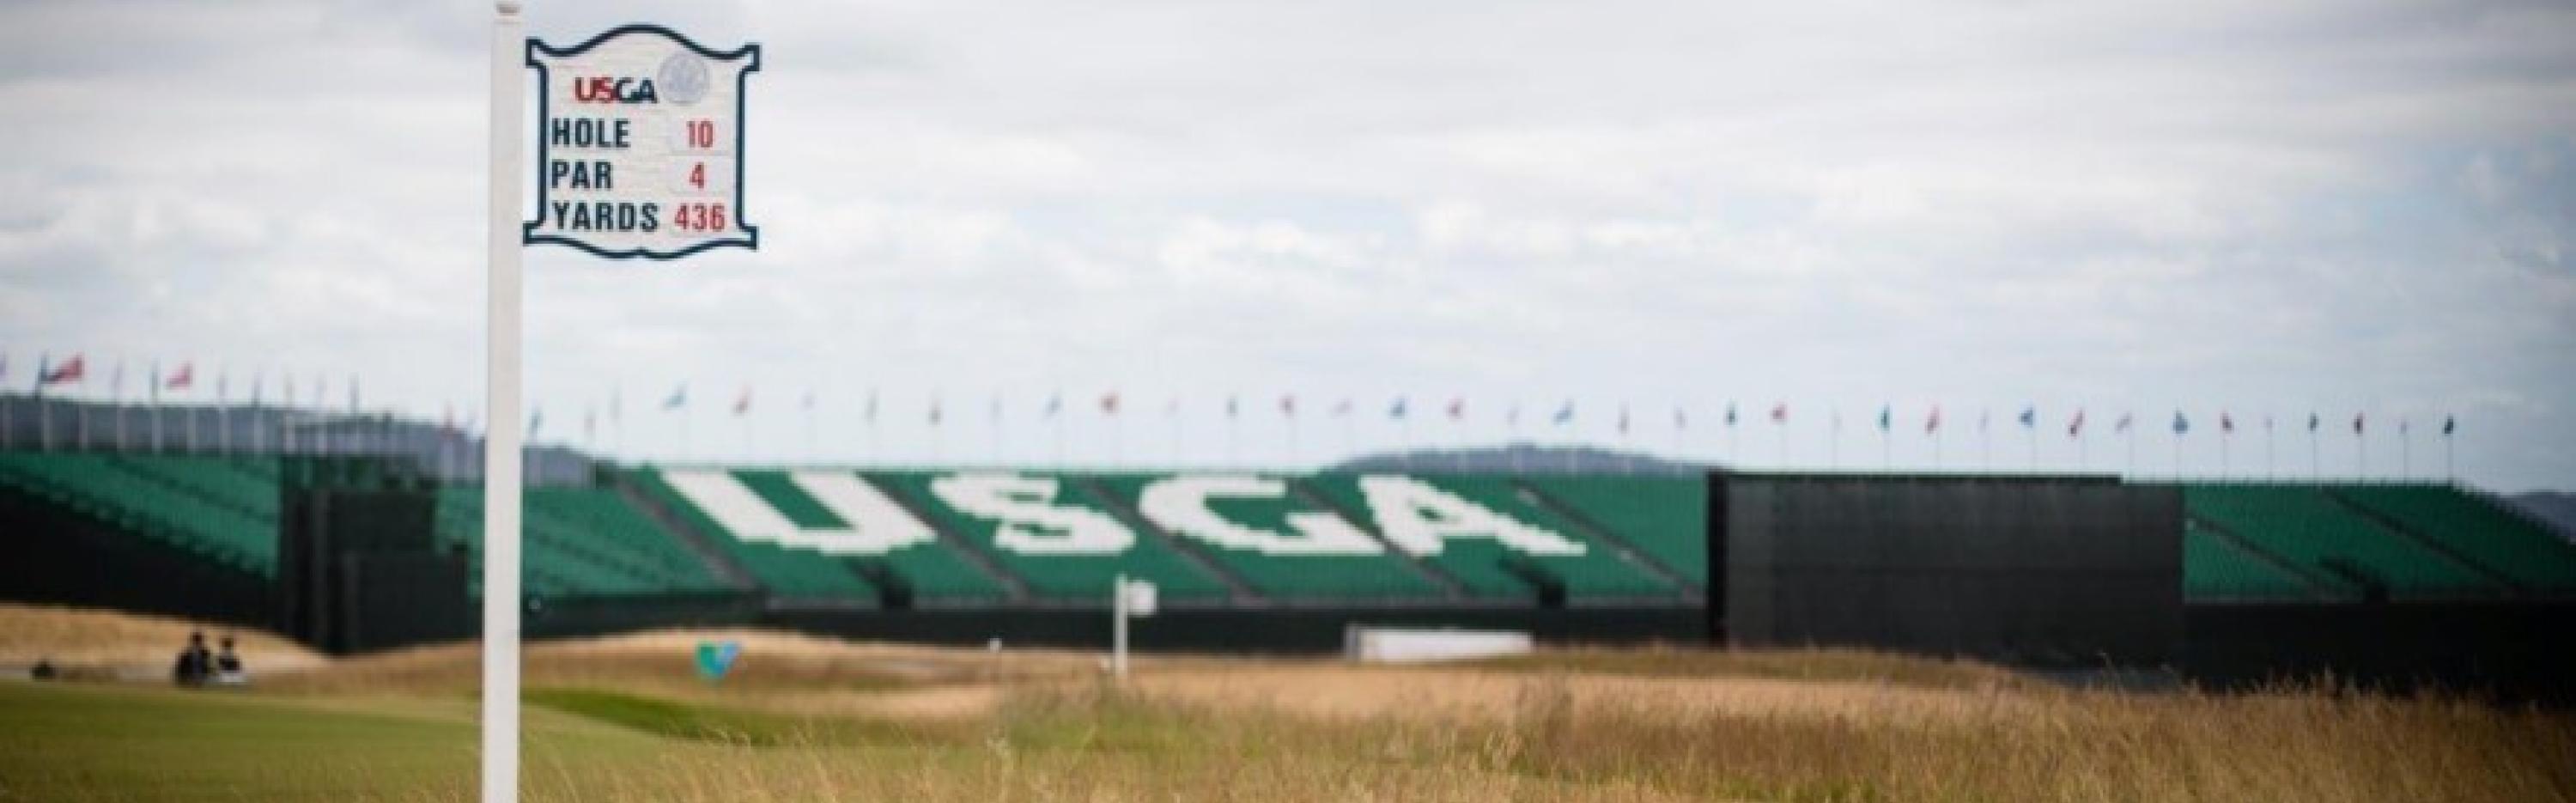 HOW THE U.S. OPEN IS GENERATING POWER WITH AN ECO-FRIENDLY TWIST